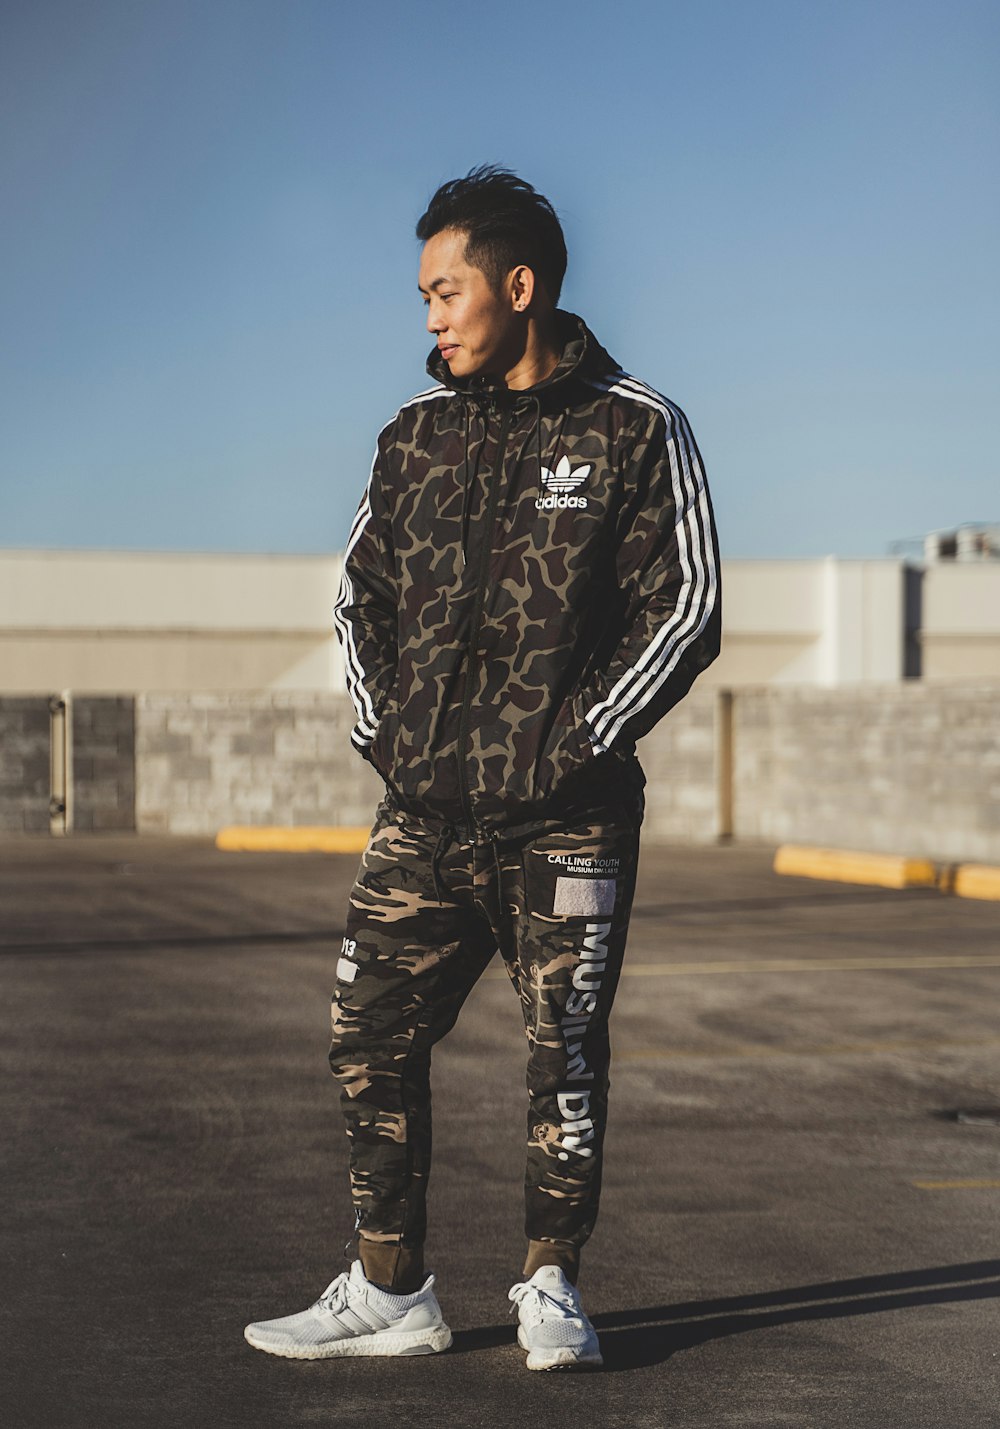 man in black and white camouflage jacket and pants standing on road during  daytime photo – Free Grey Image on Unsplash